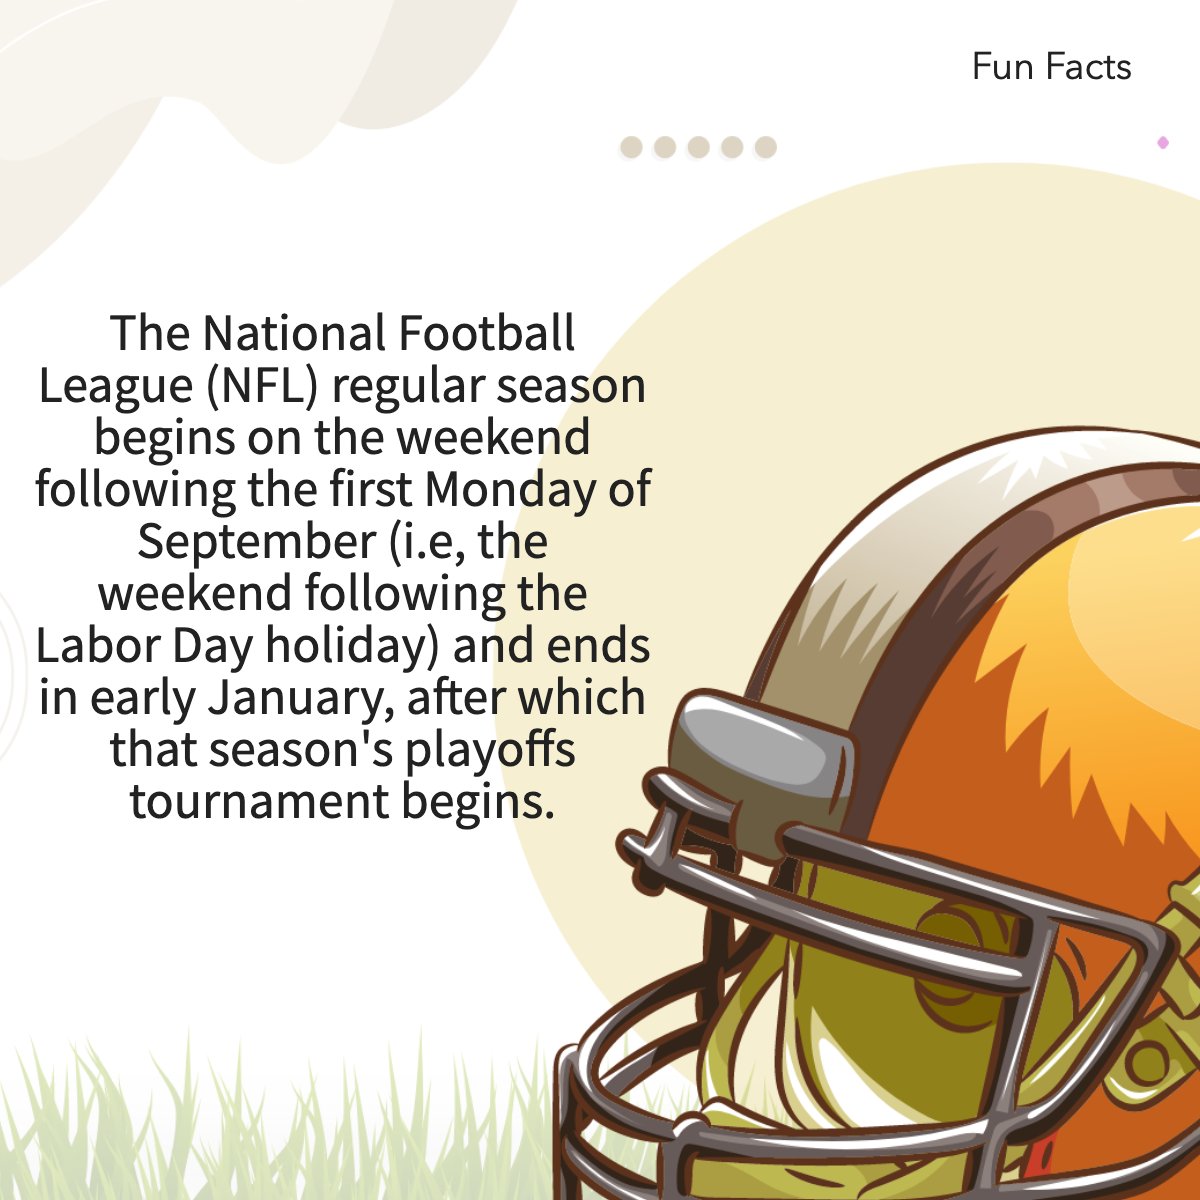 The regular season of the NFL is followed by many!

#americanfootball #nflfootball #sportsfacts #didyouknow #superbowl